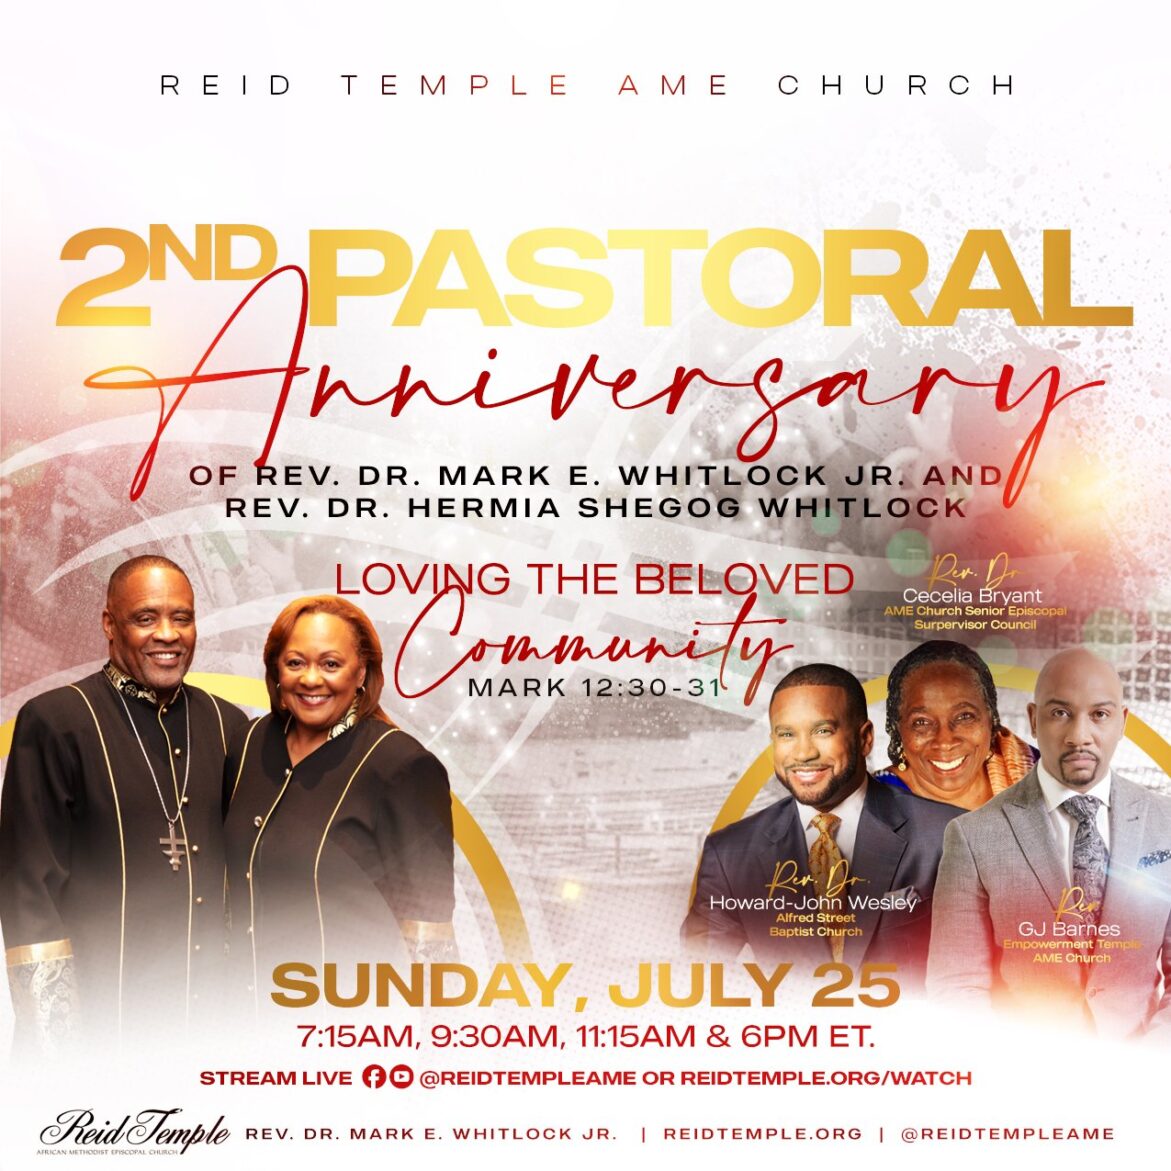 Black Podcasting - "We Are The Church" | Rev. Dr. Cecelia Bryant  | 2nd Pastoral Anniversary Service RTAME